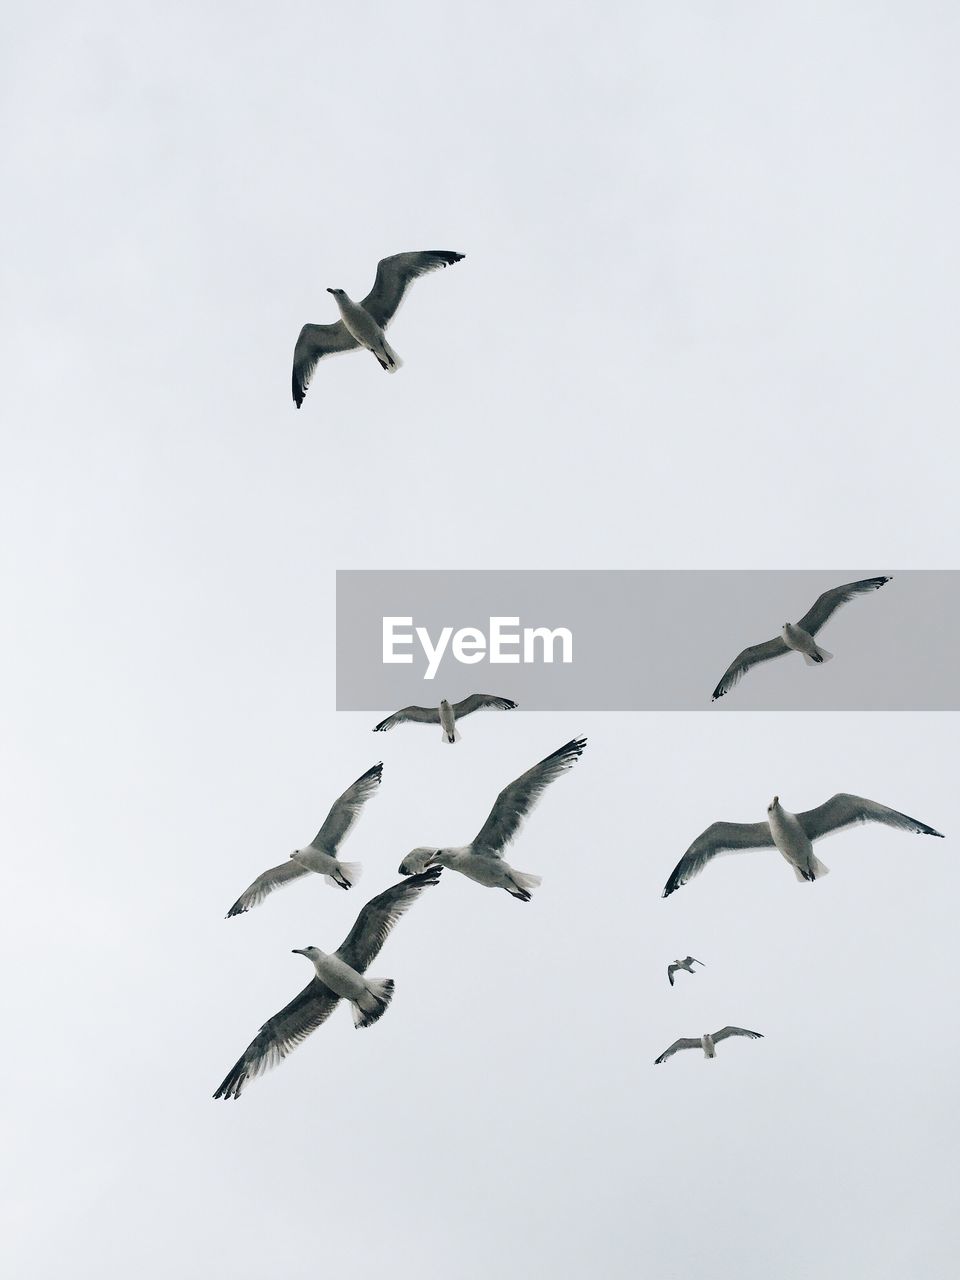 Low angle view of seagulls flying against clear sky